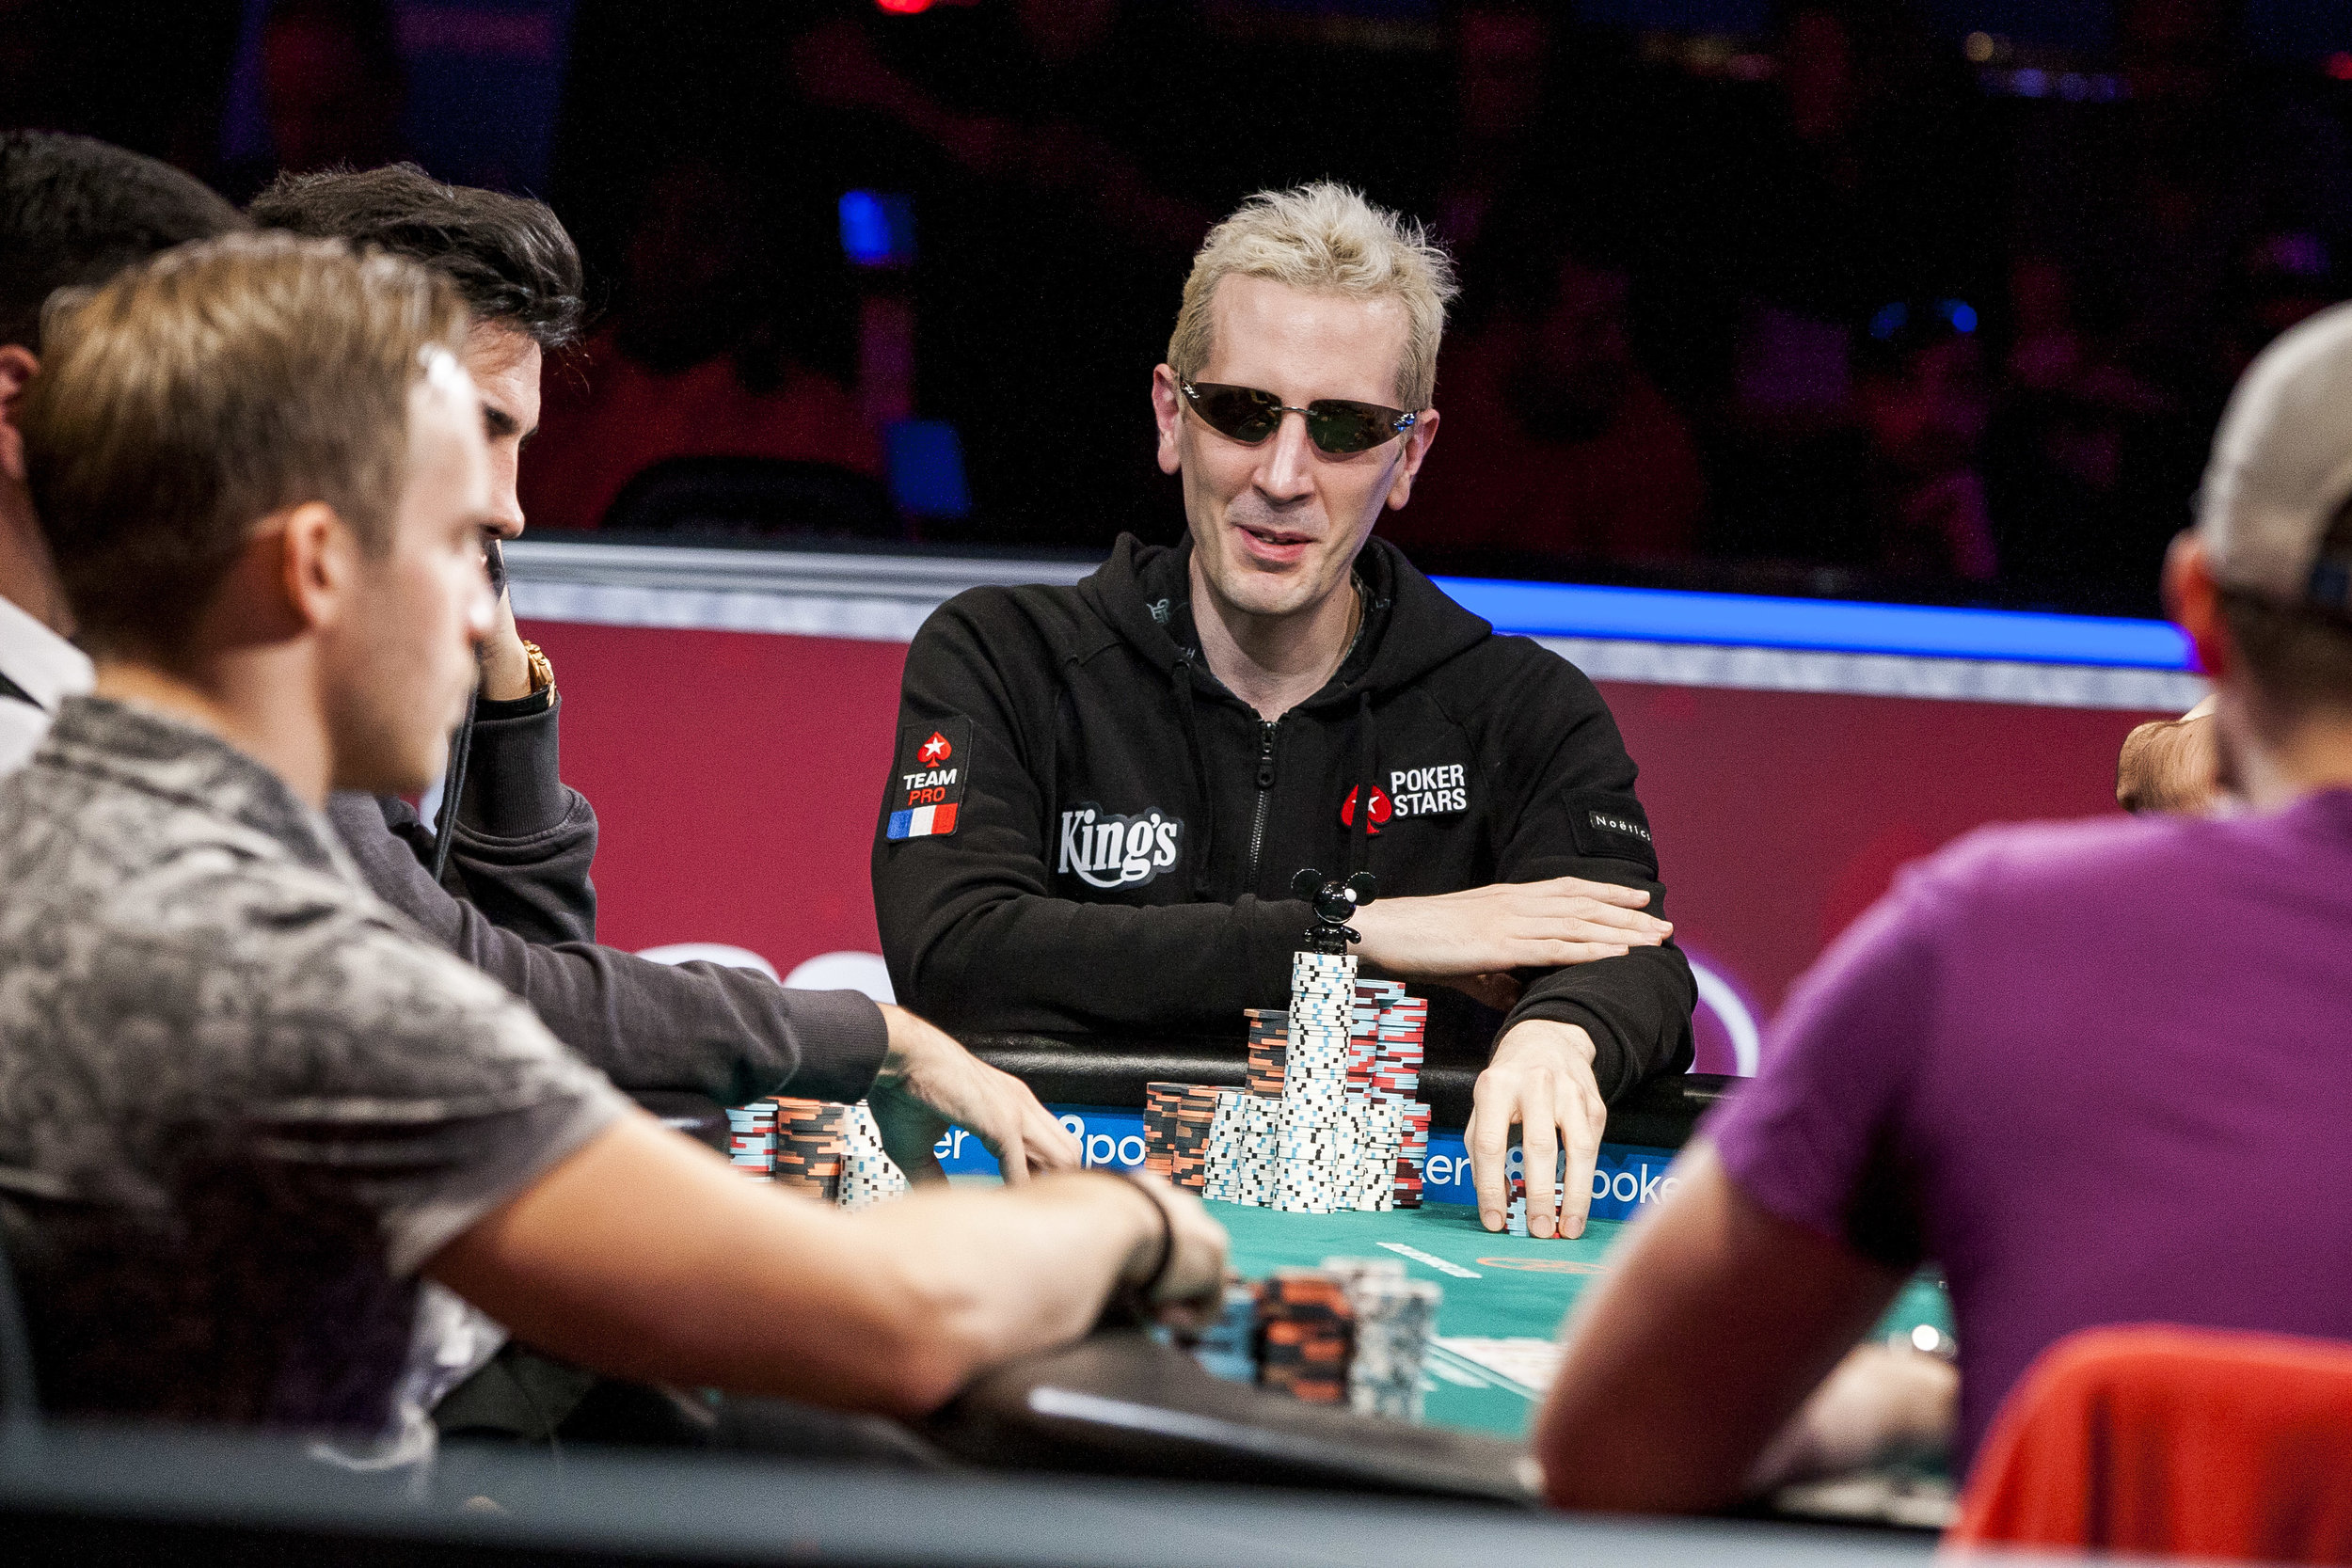  Bertrand "ElkY" Grospellier competes in the $111,111 buy-in High Roller for One Drop No-Limit Hold'em event at the World Series of Poker at the Rio Convention Center on Monday, June 5, 2017. Patrick Connolly Las Vegas Review-Journal @PConnPie 